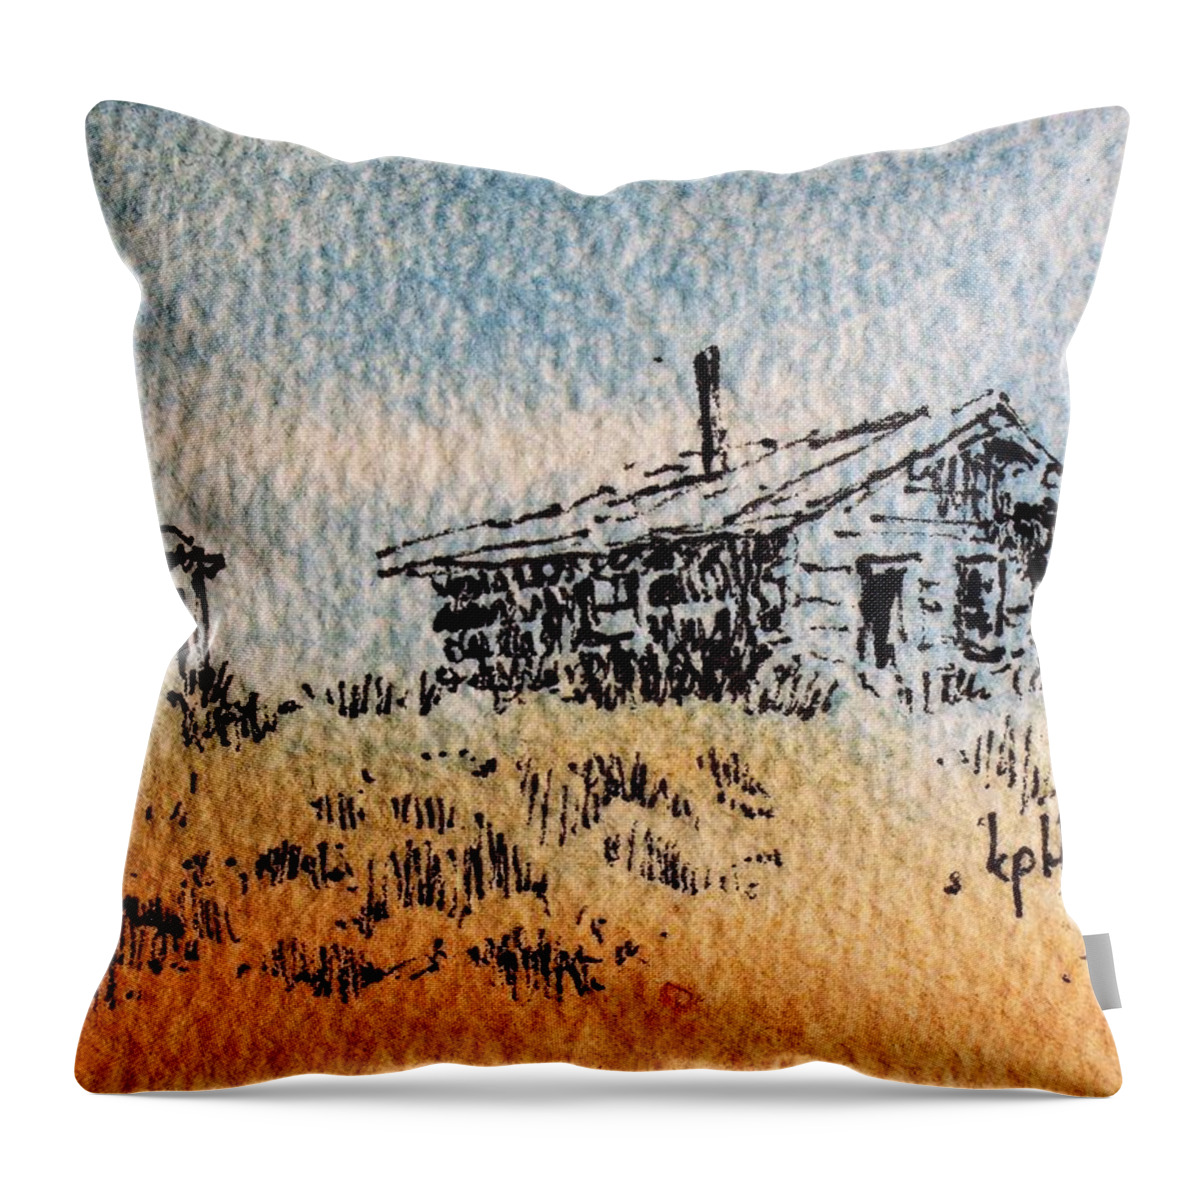 Cabin Throw Pillow featuring the mixed media Old Cabin by Kevin Heaney